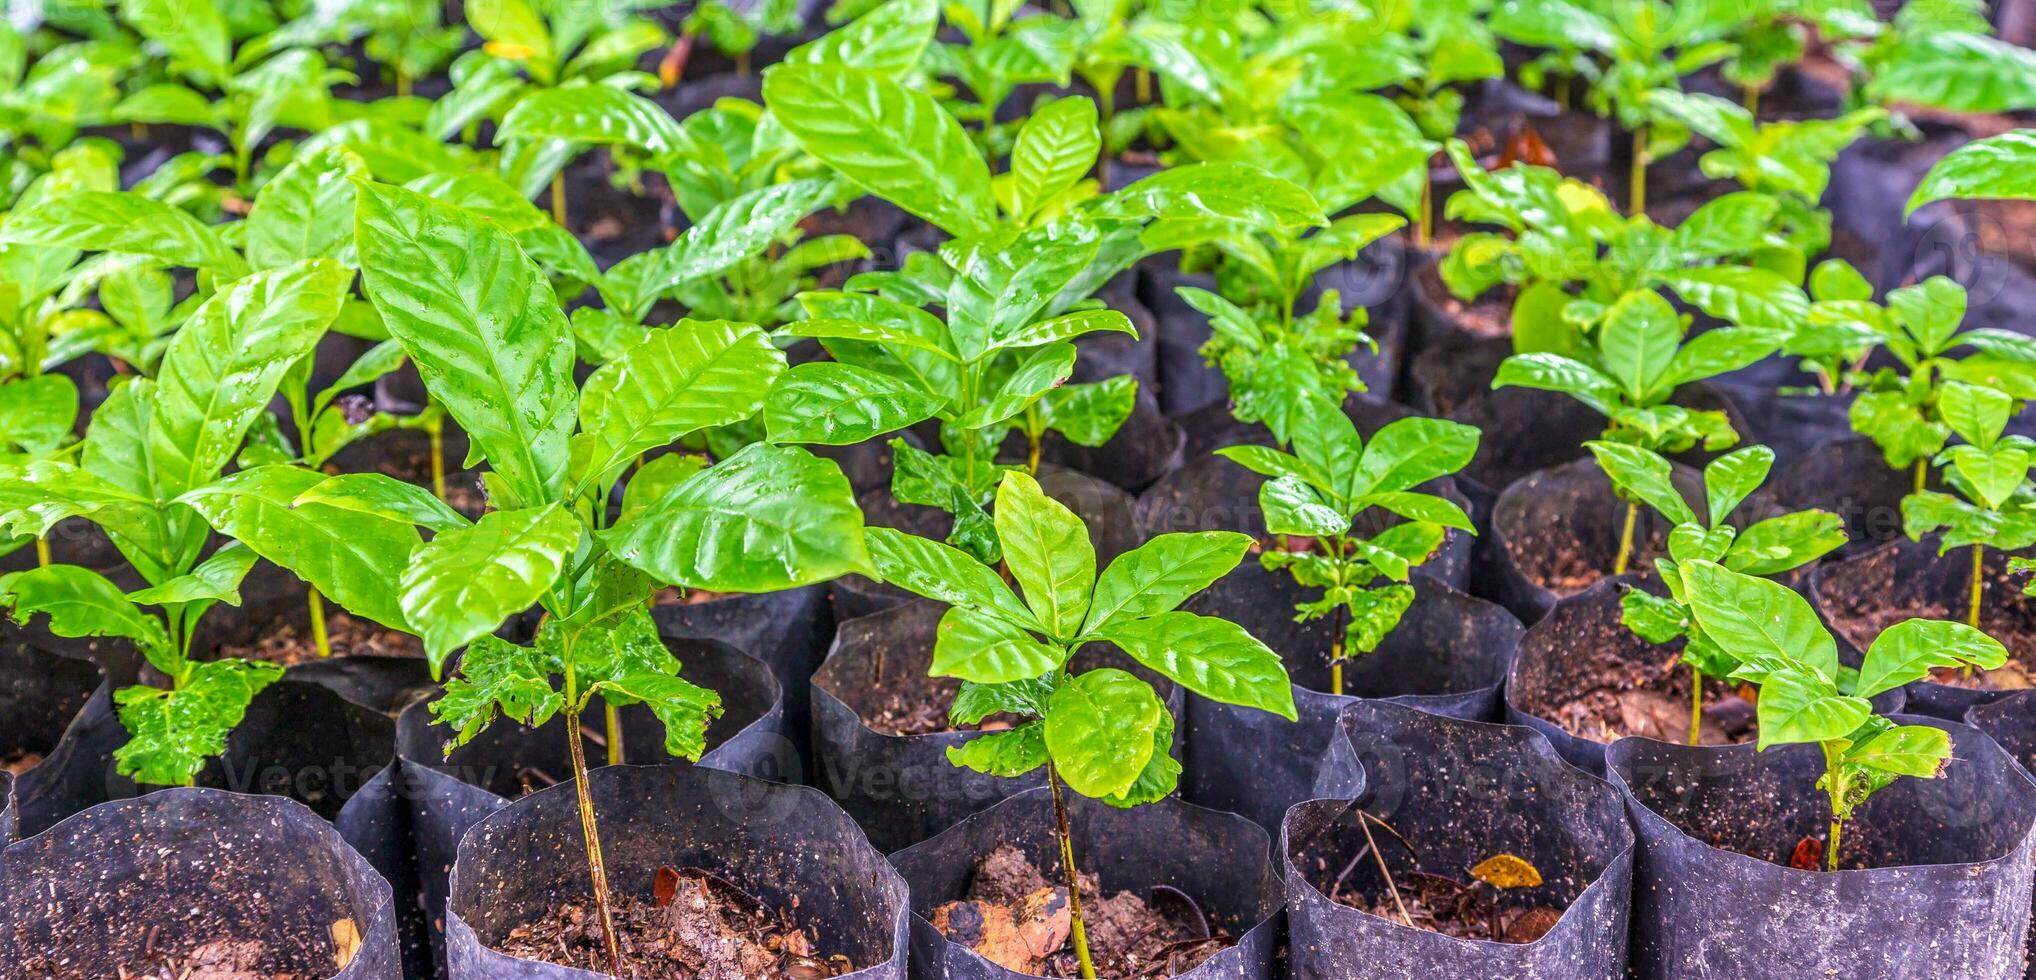 Seedlings of small coffee trees in the nursery to prepare for planting photo